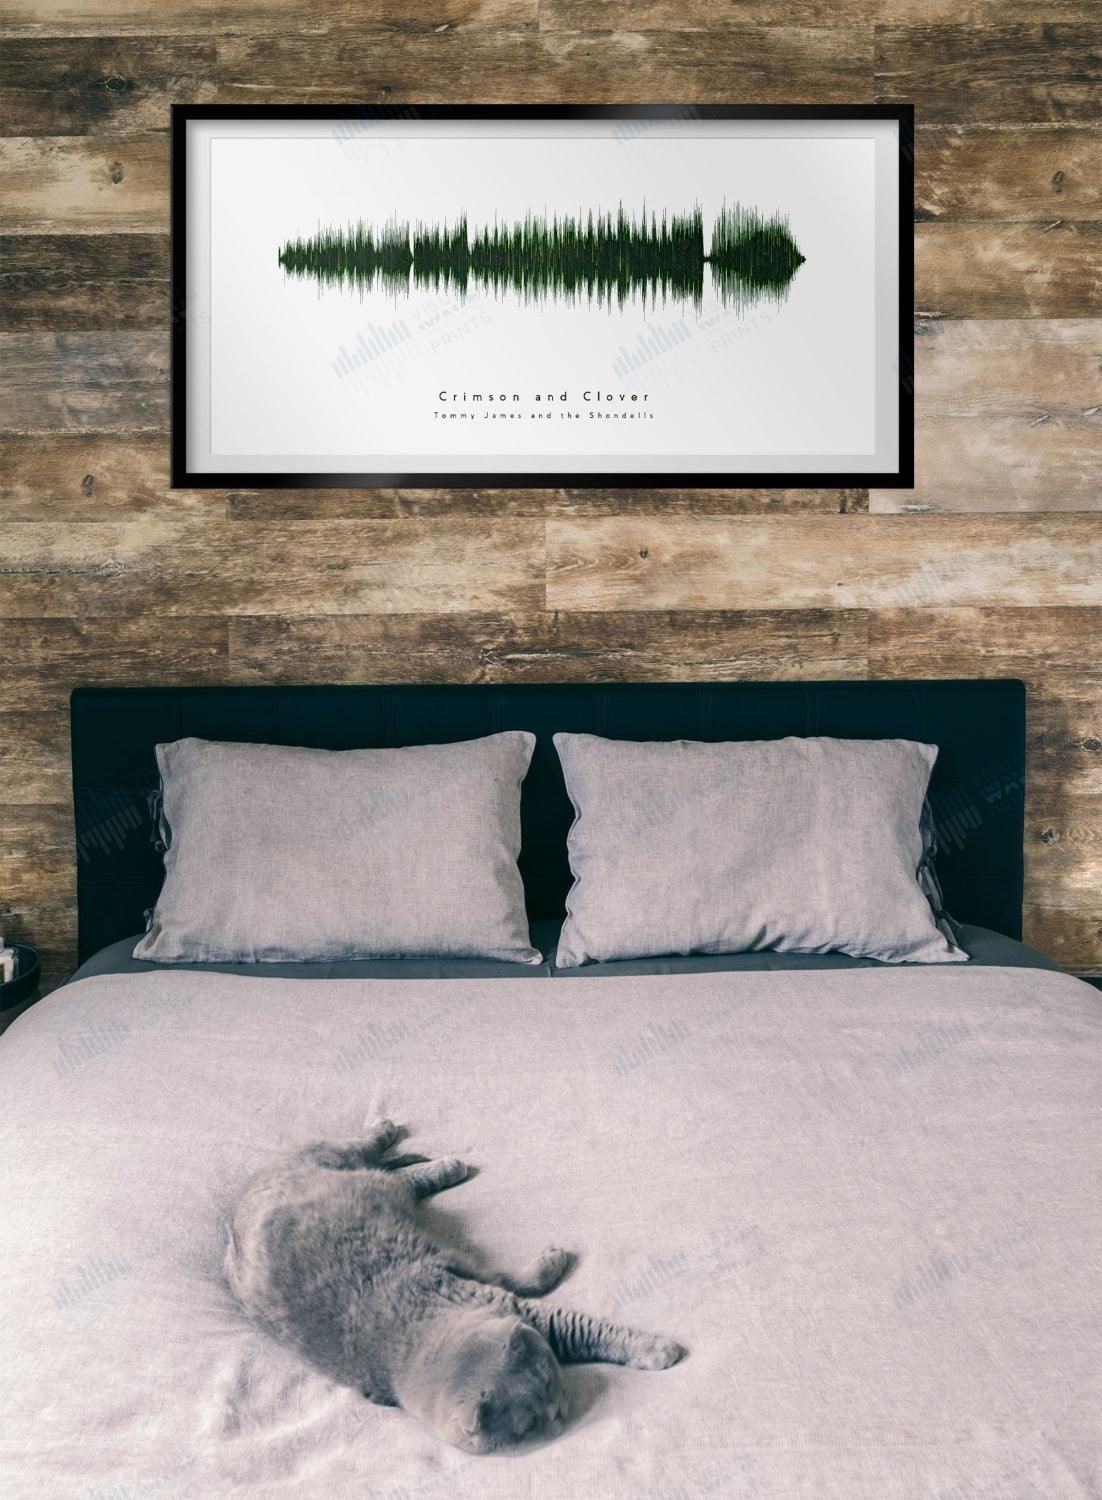 Crimson and Clover by Tommy James and the Shondells - Visual Wave Prints